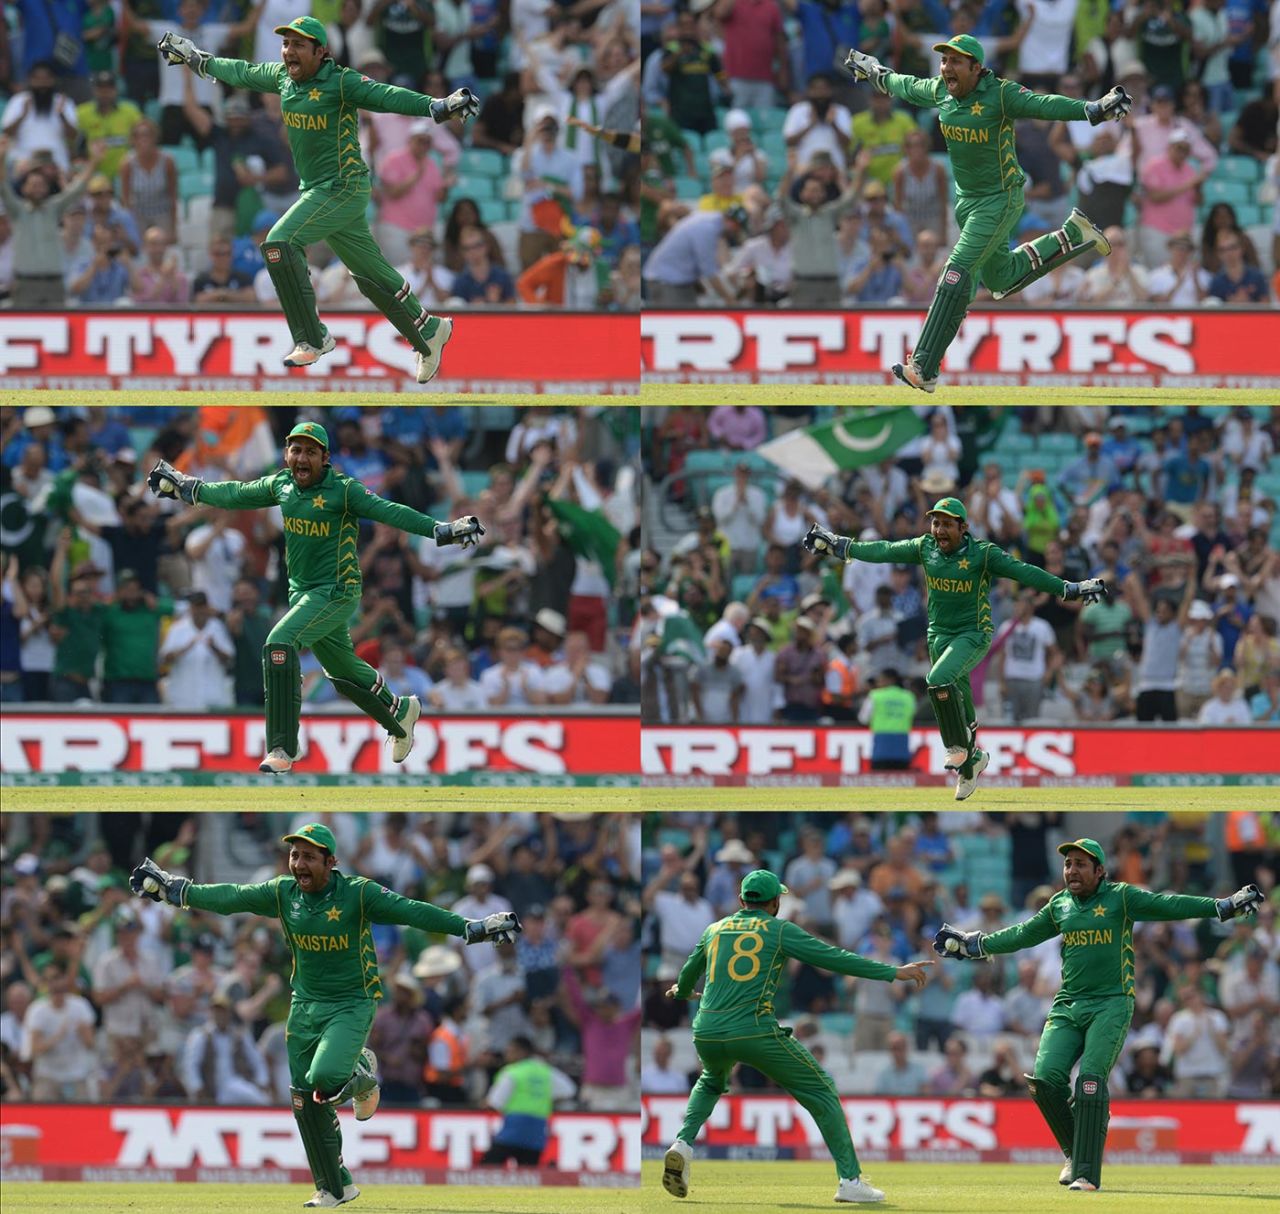 Collage: Sarfraz Ahmed celebrates taking the catch that ended the match, India v Pakistan, Final, Champions Trophy 2017, The Oval, London, June 18, 2017